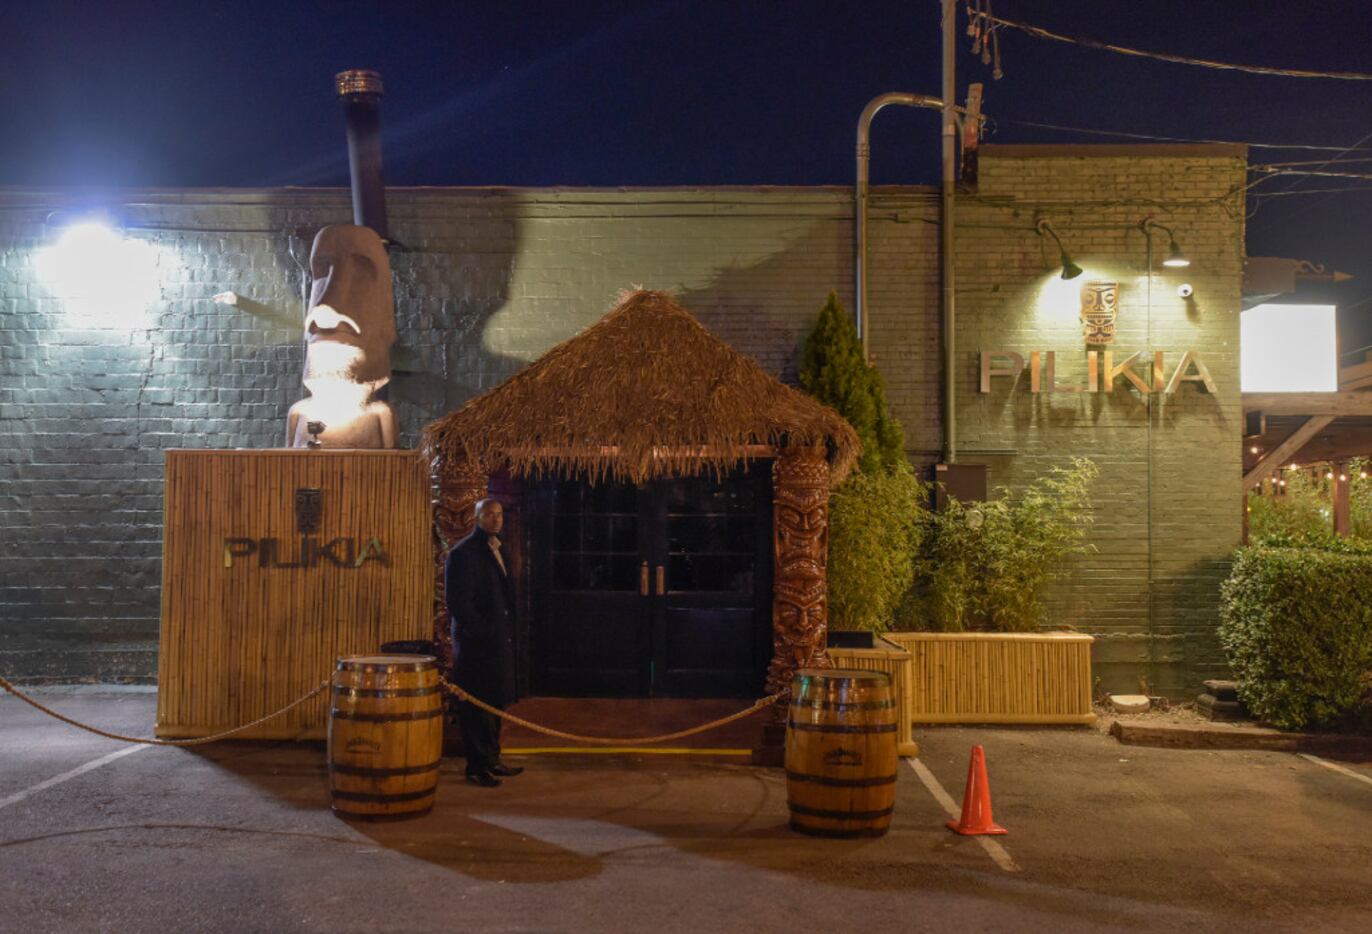 The entrance to Pilikia, a tiki bar on Ross Ave., open in the former Three Sheets location.